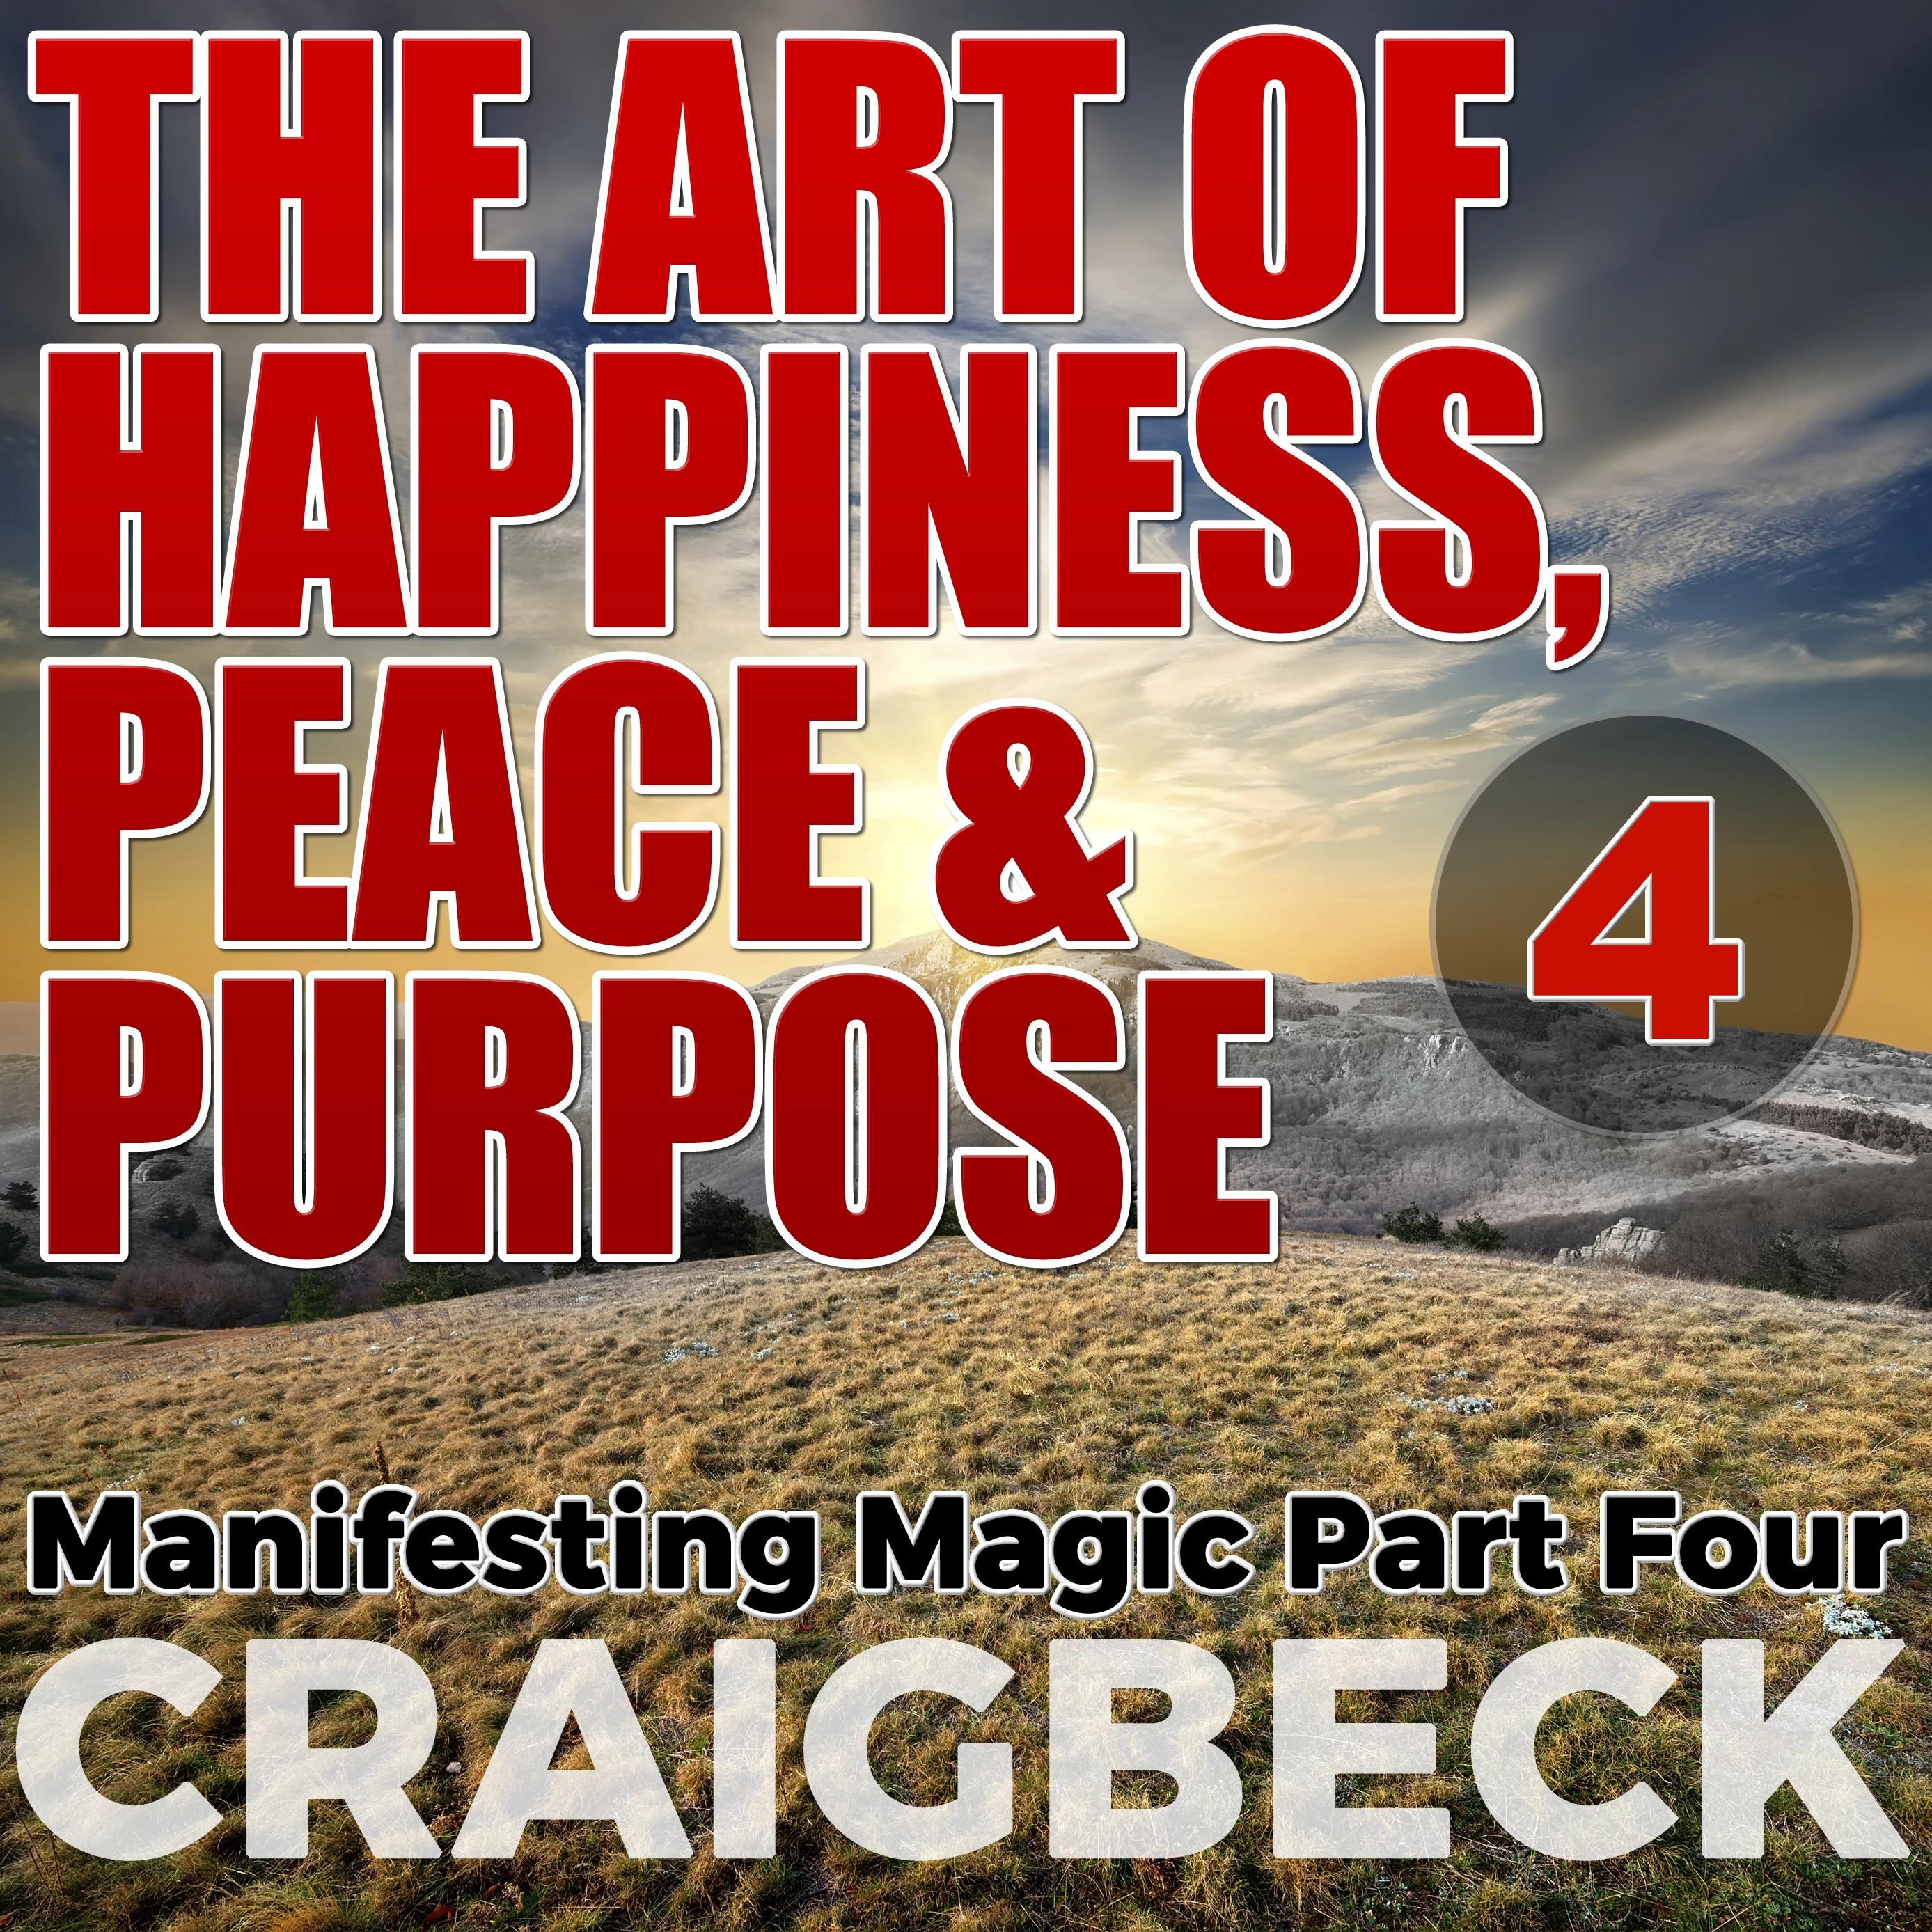 The Art of Happiness, Peace & Purpose: Manifesting Magic Part 4 Audiobook by Craig Beck